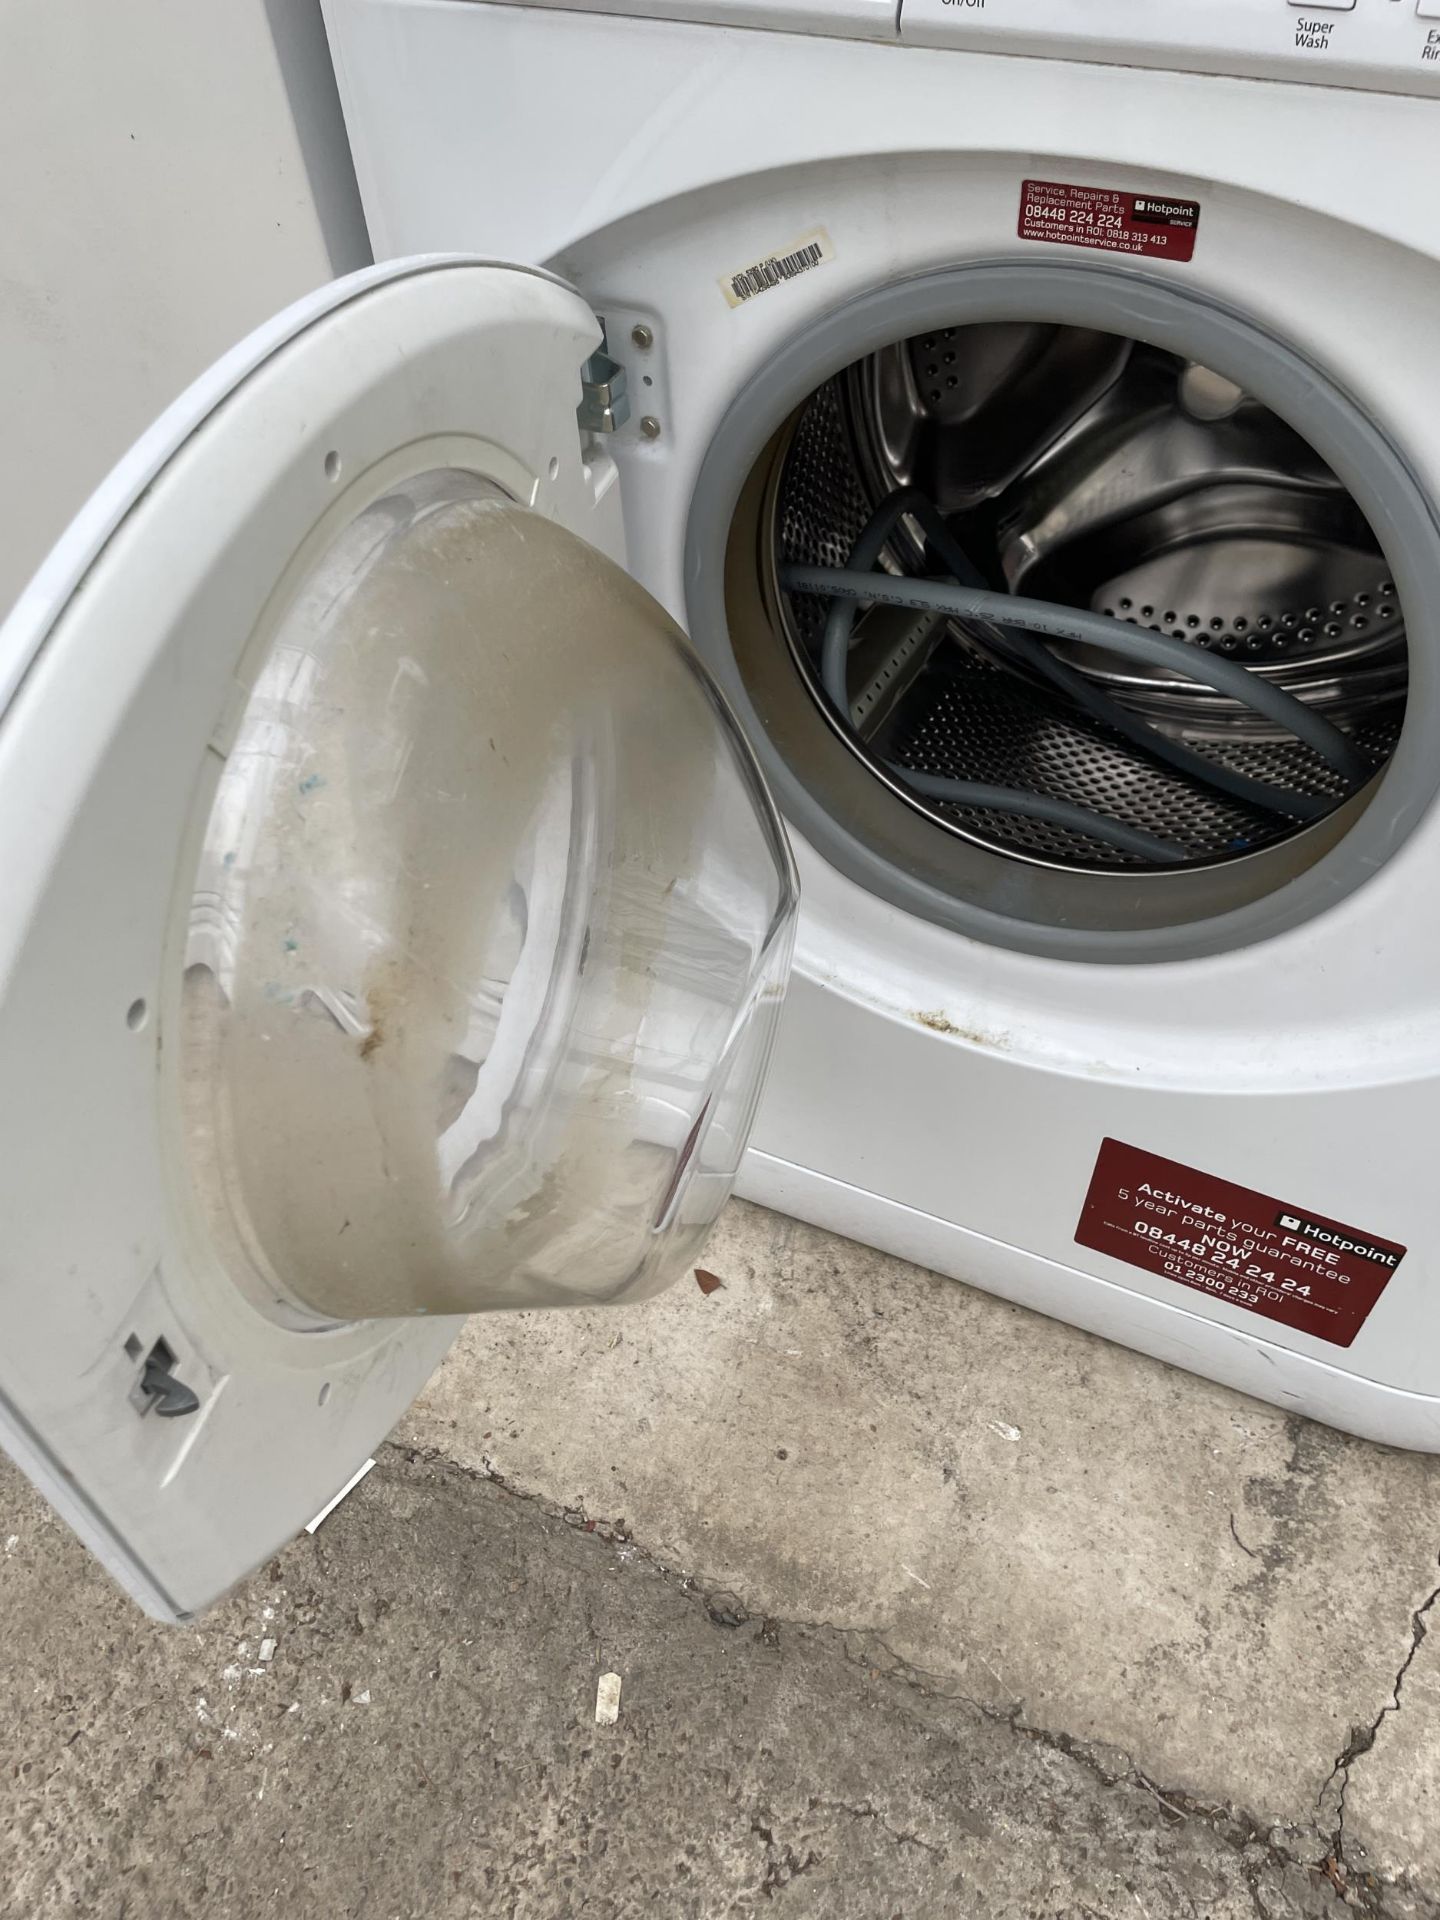 A WHITE HOTPOINT 7KG WASHING MACHINE BELIEVED IN WORKING ORDER BUT NO WARRANTY - Image 2 of 2